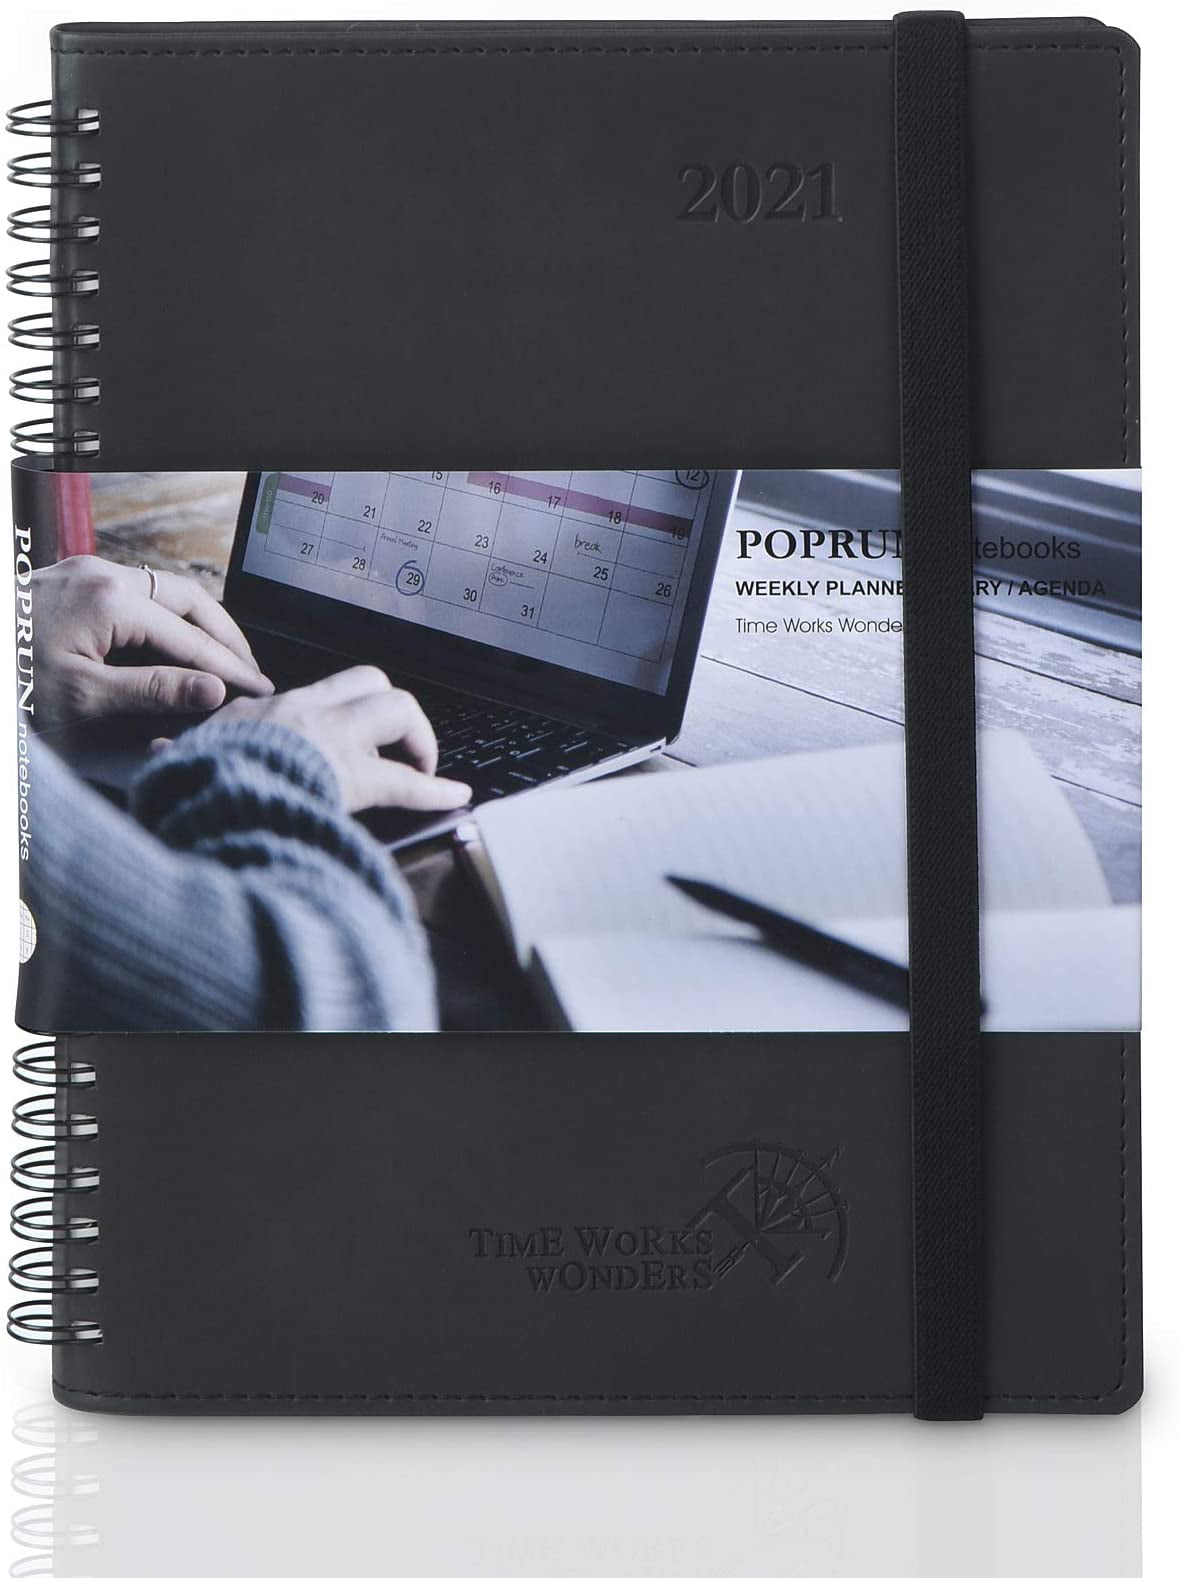 Sof 2021 Weekly Planner And Monthly Planner Hourly Appointment Book 2021 